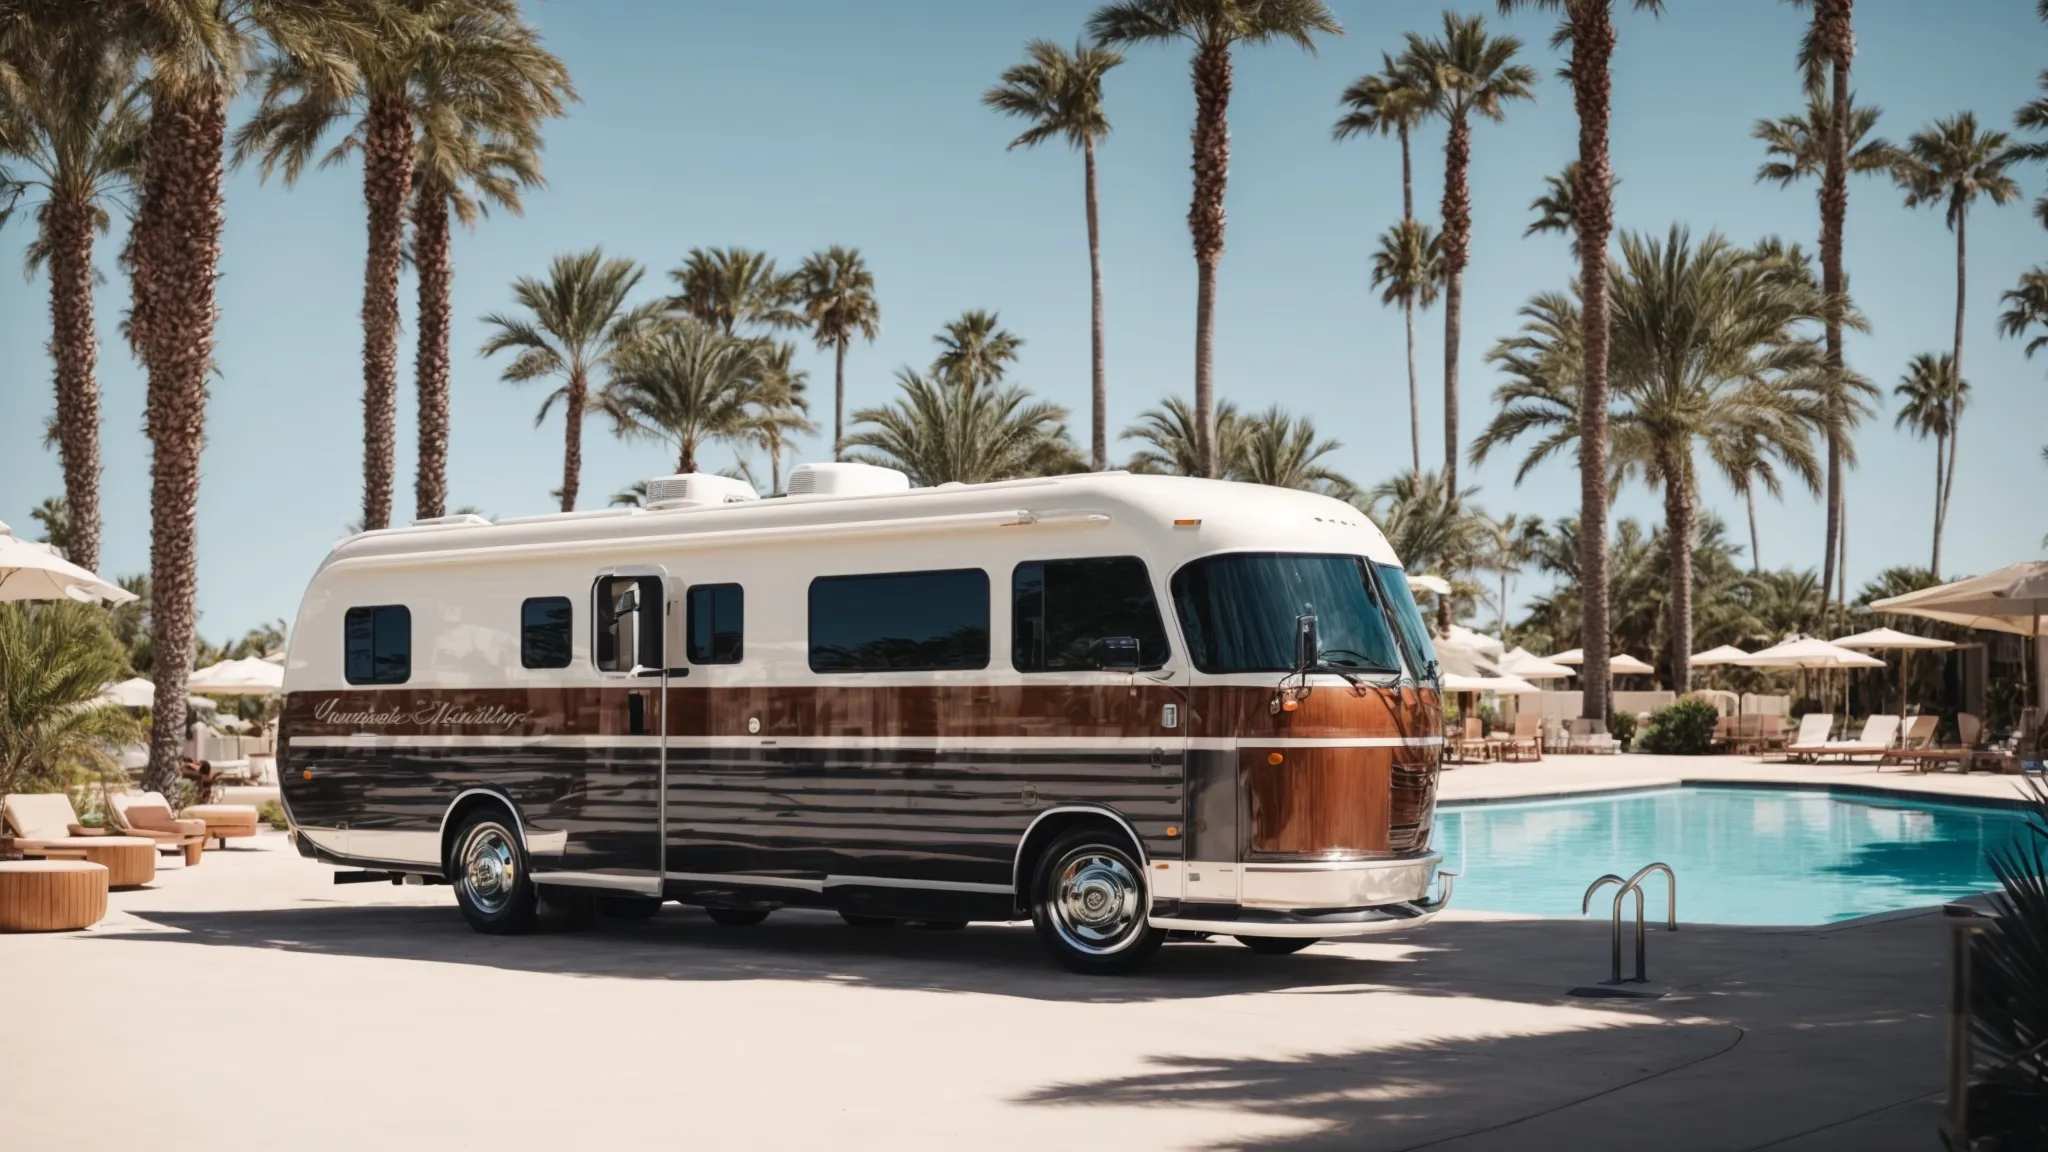 a lavish rv is parked at a spacious, well-manicured rv resort with a pool and palm trees under a clear blue sky.